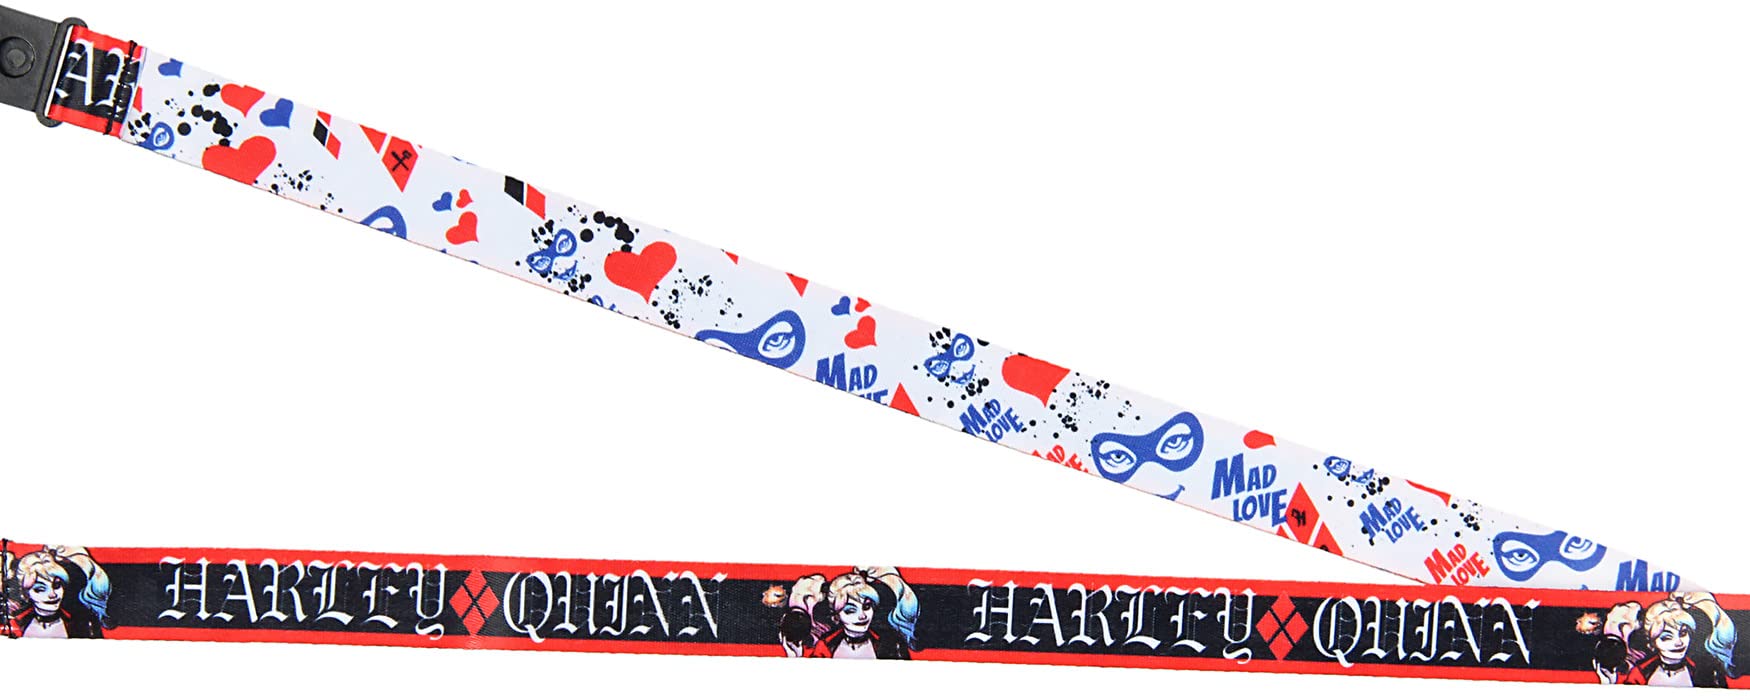 DC Comics Harley Quinn Mad Love Lanyard ID Badge Holder with Collectible Sticker